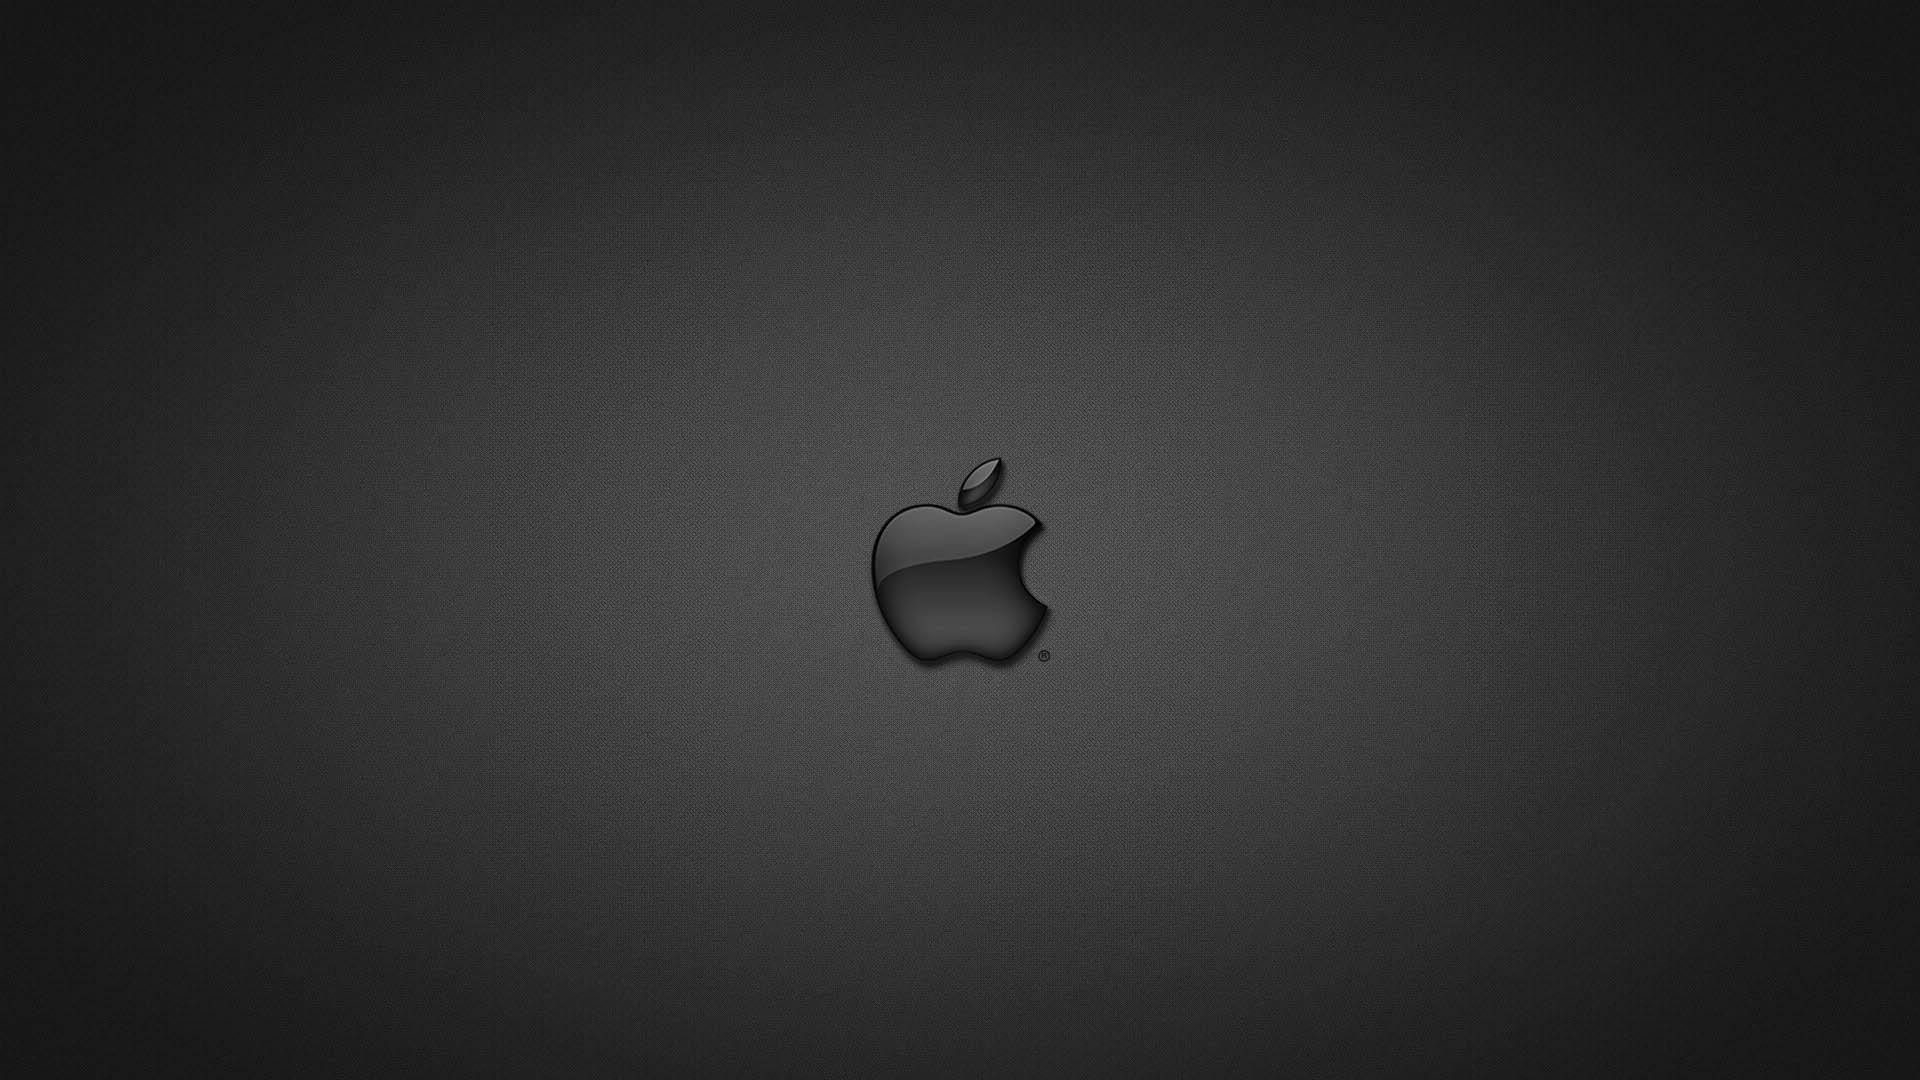 1920x1080 Collection of Apple Hd Wallpapers on HDWallpapers Apple Hd Wallpaper  Wallpapers)